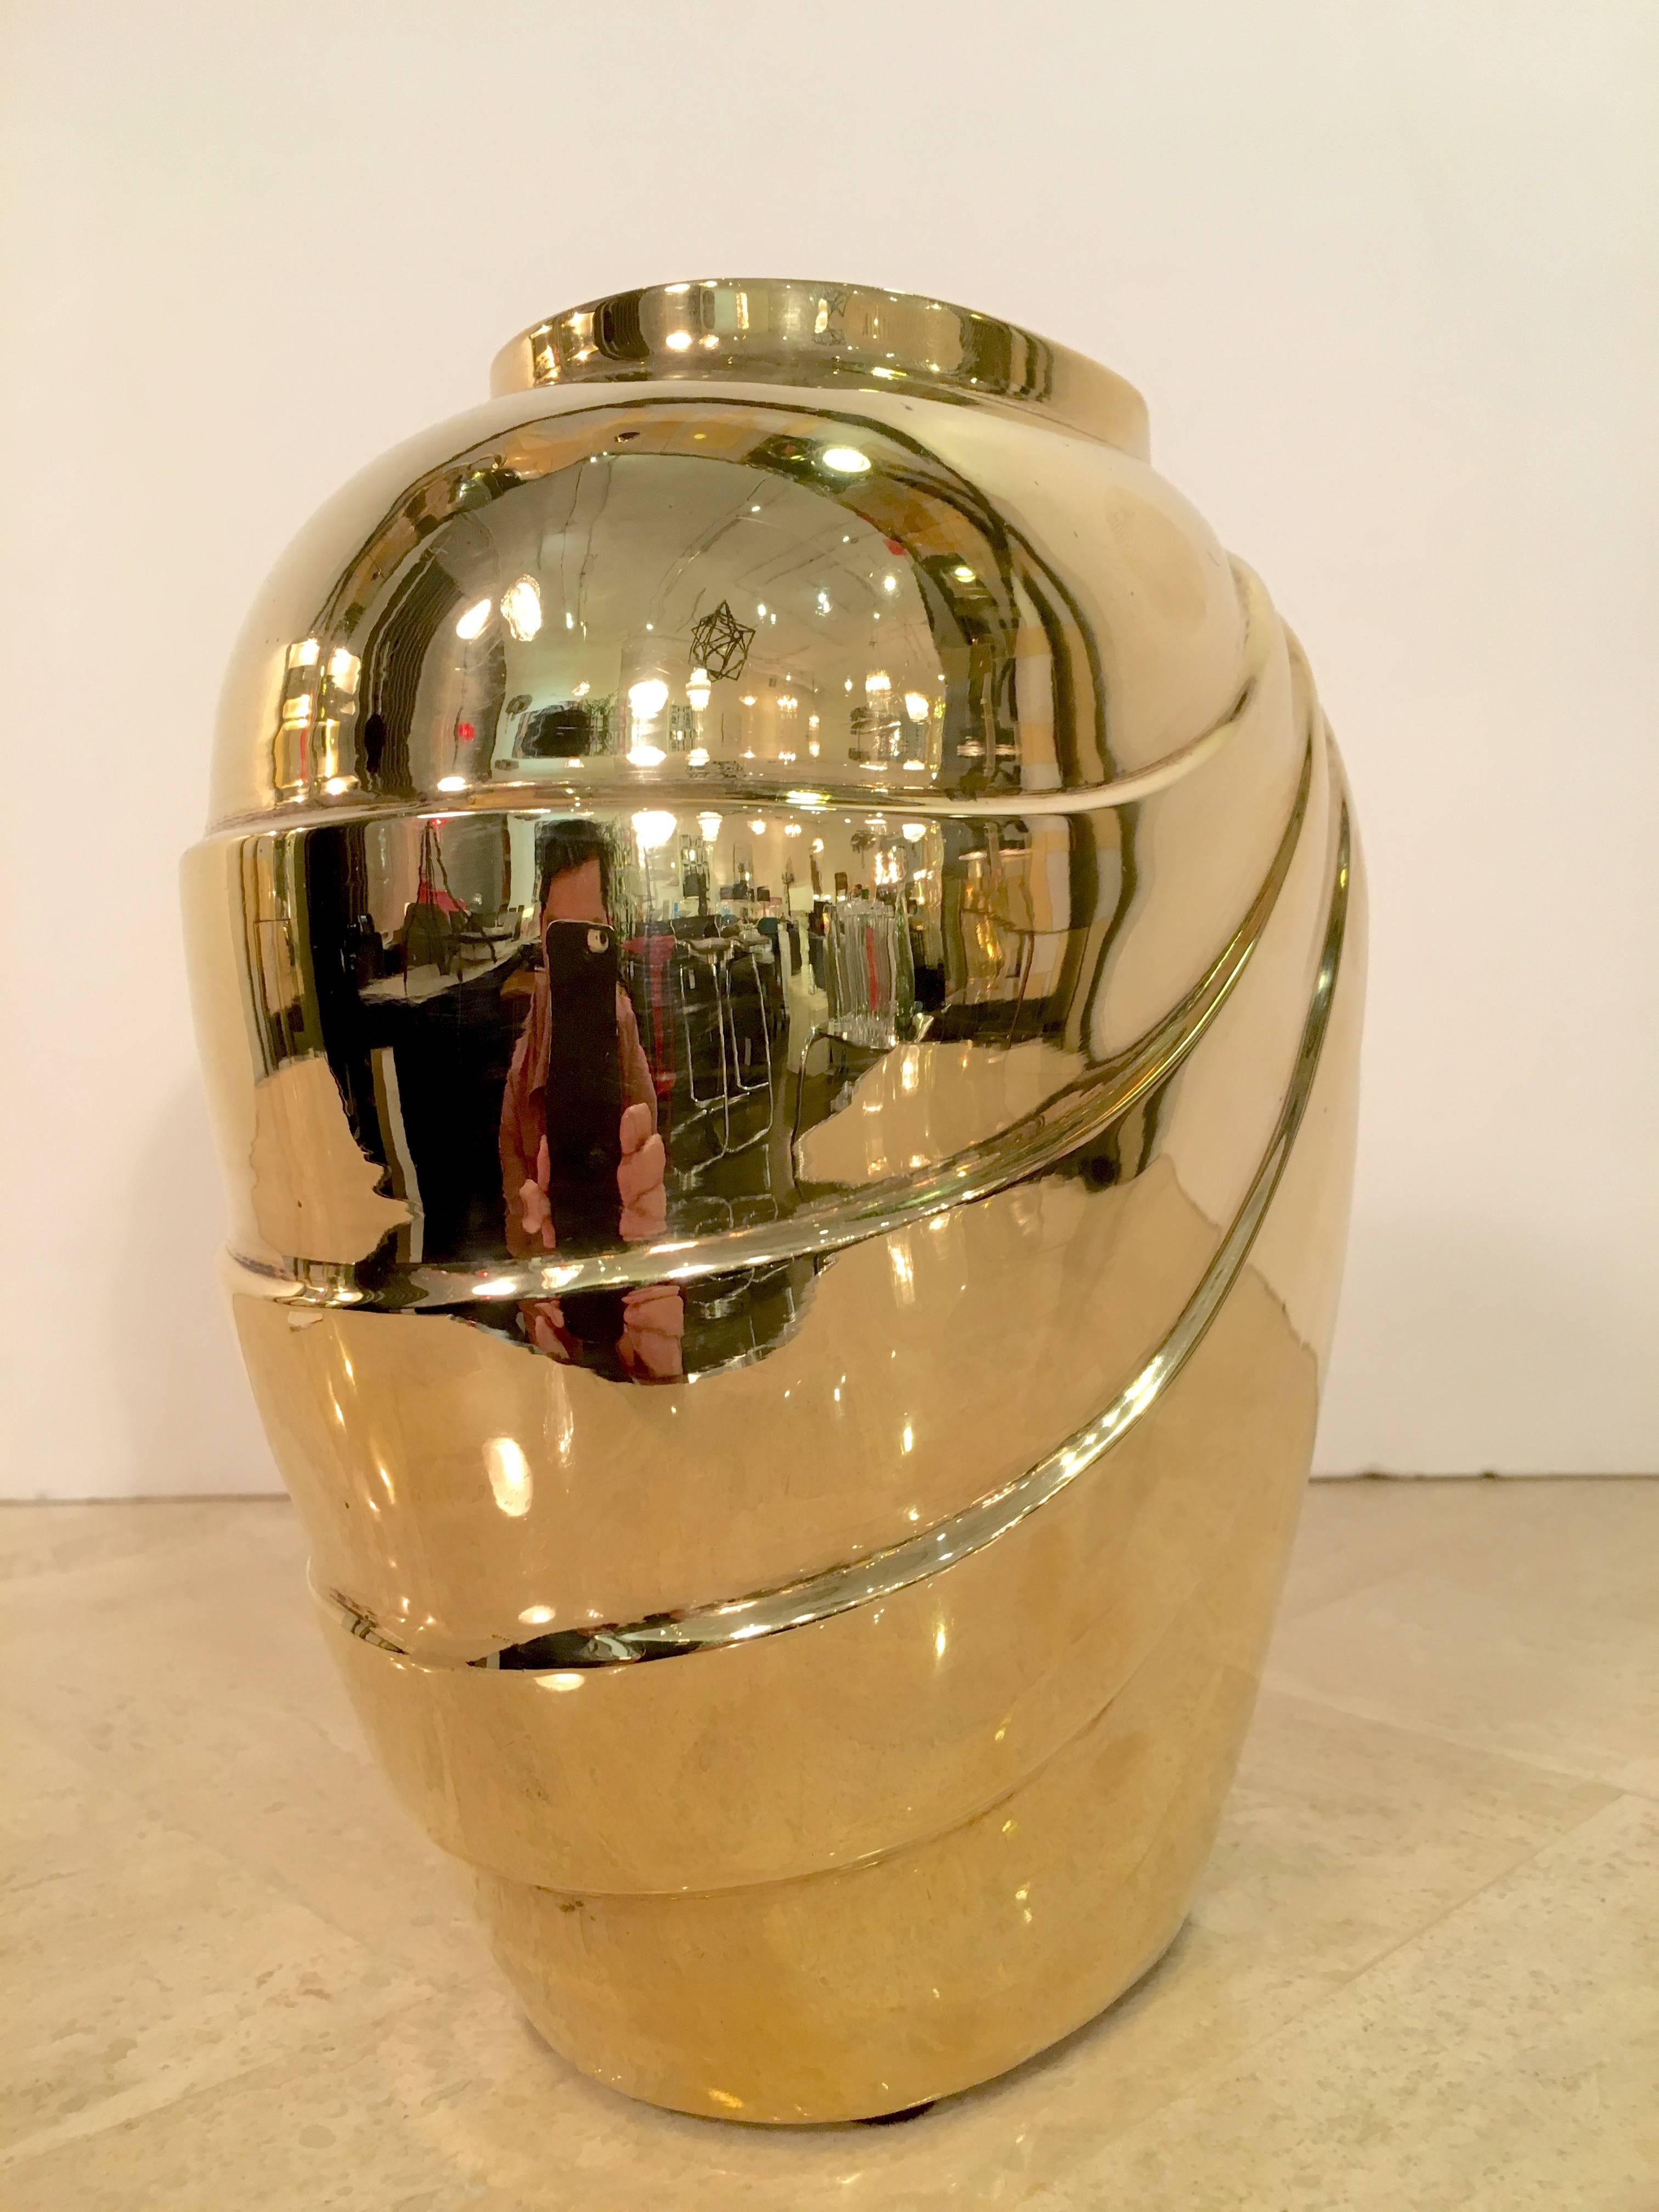 Stylish brass vase highly polished to a beautiful, brilliant shine. Please contact for location. 